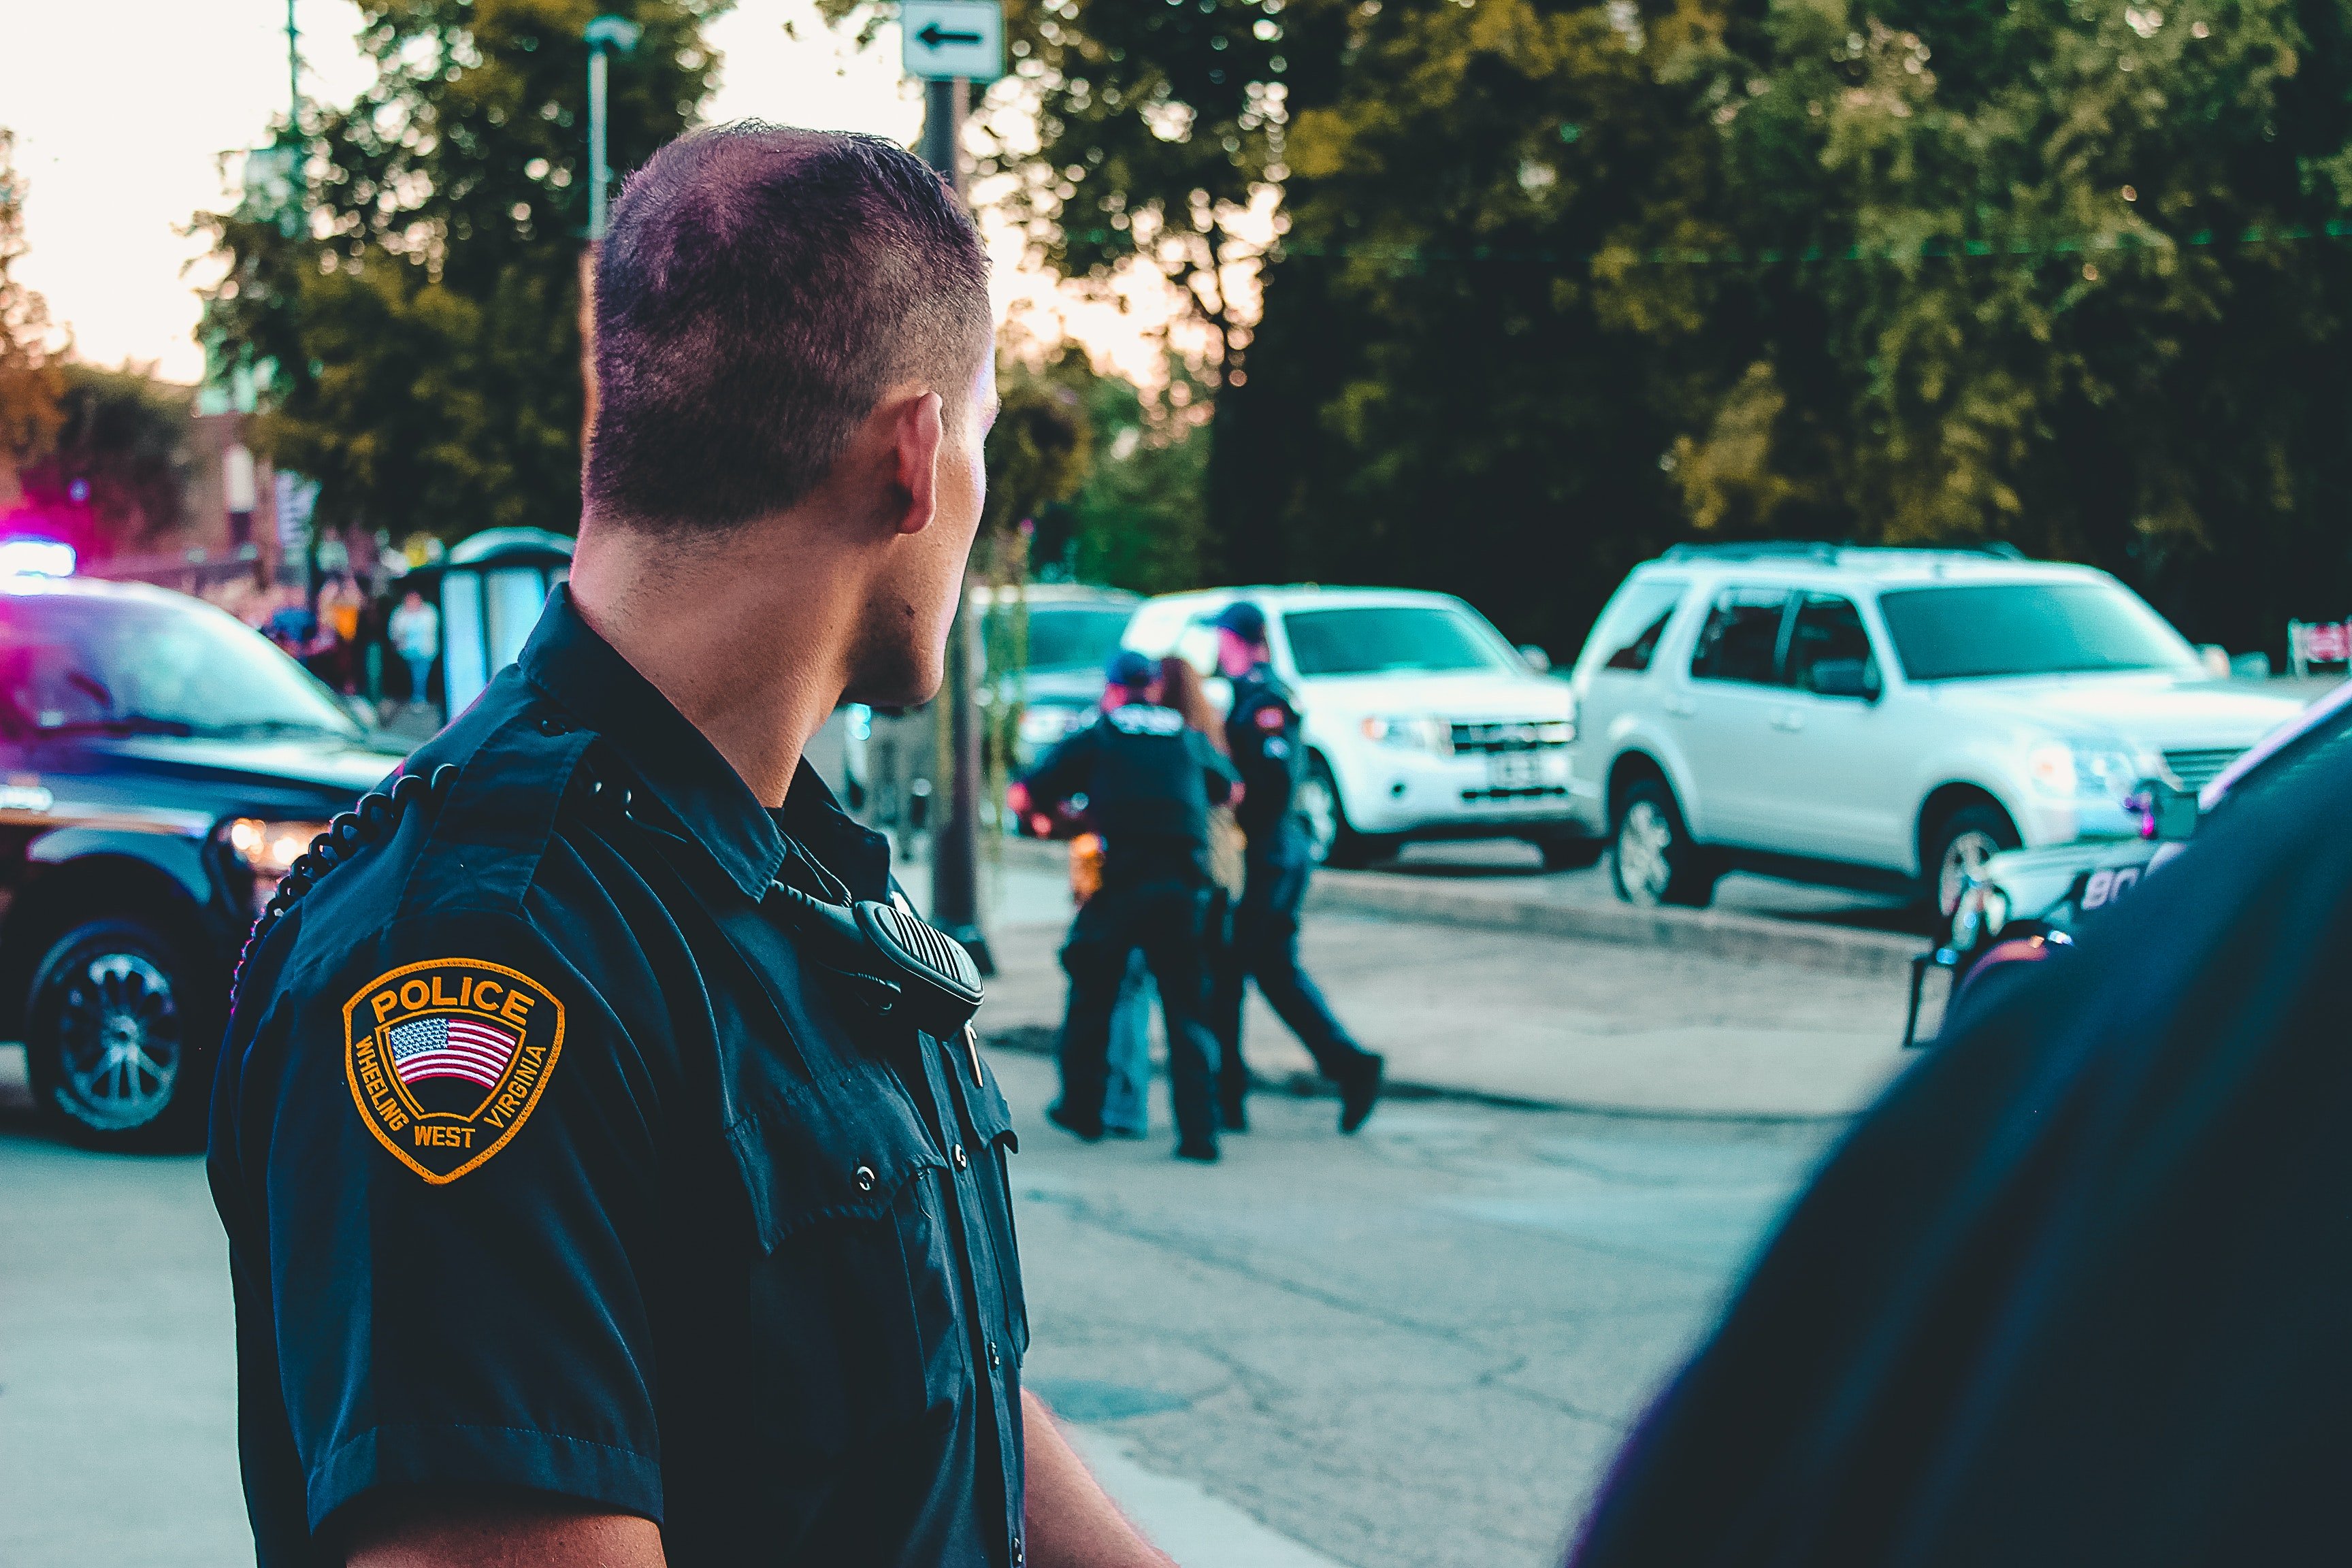 An officer looking back toward the scene behind him. | Source: Pexels